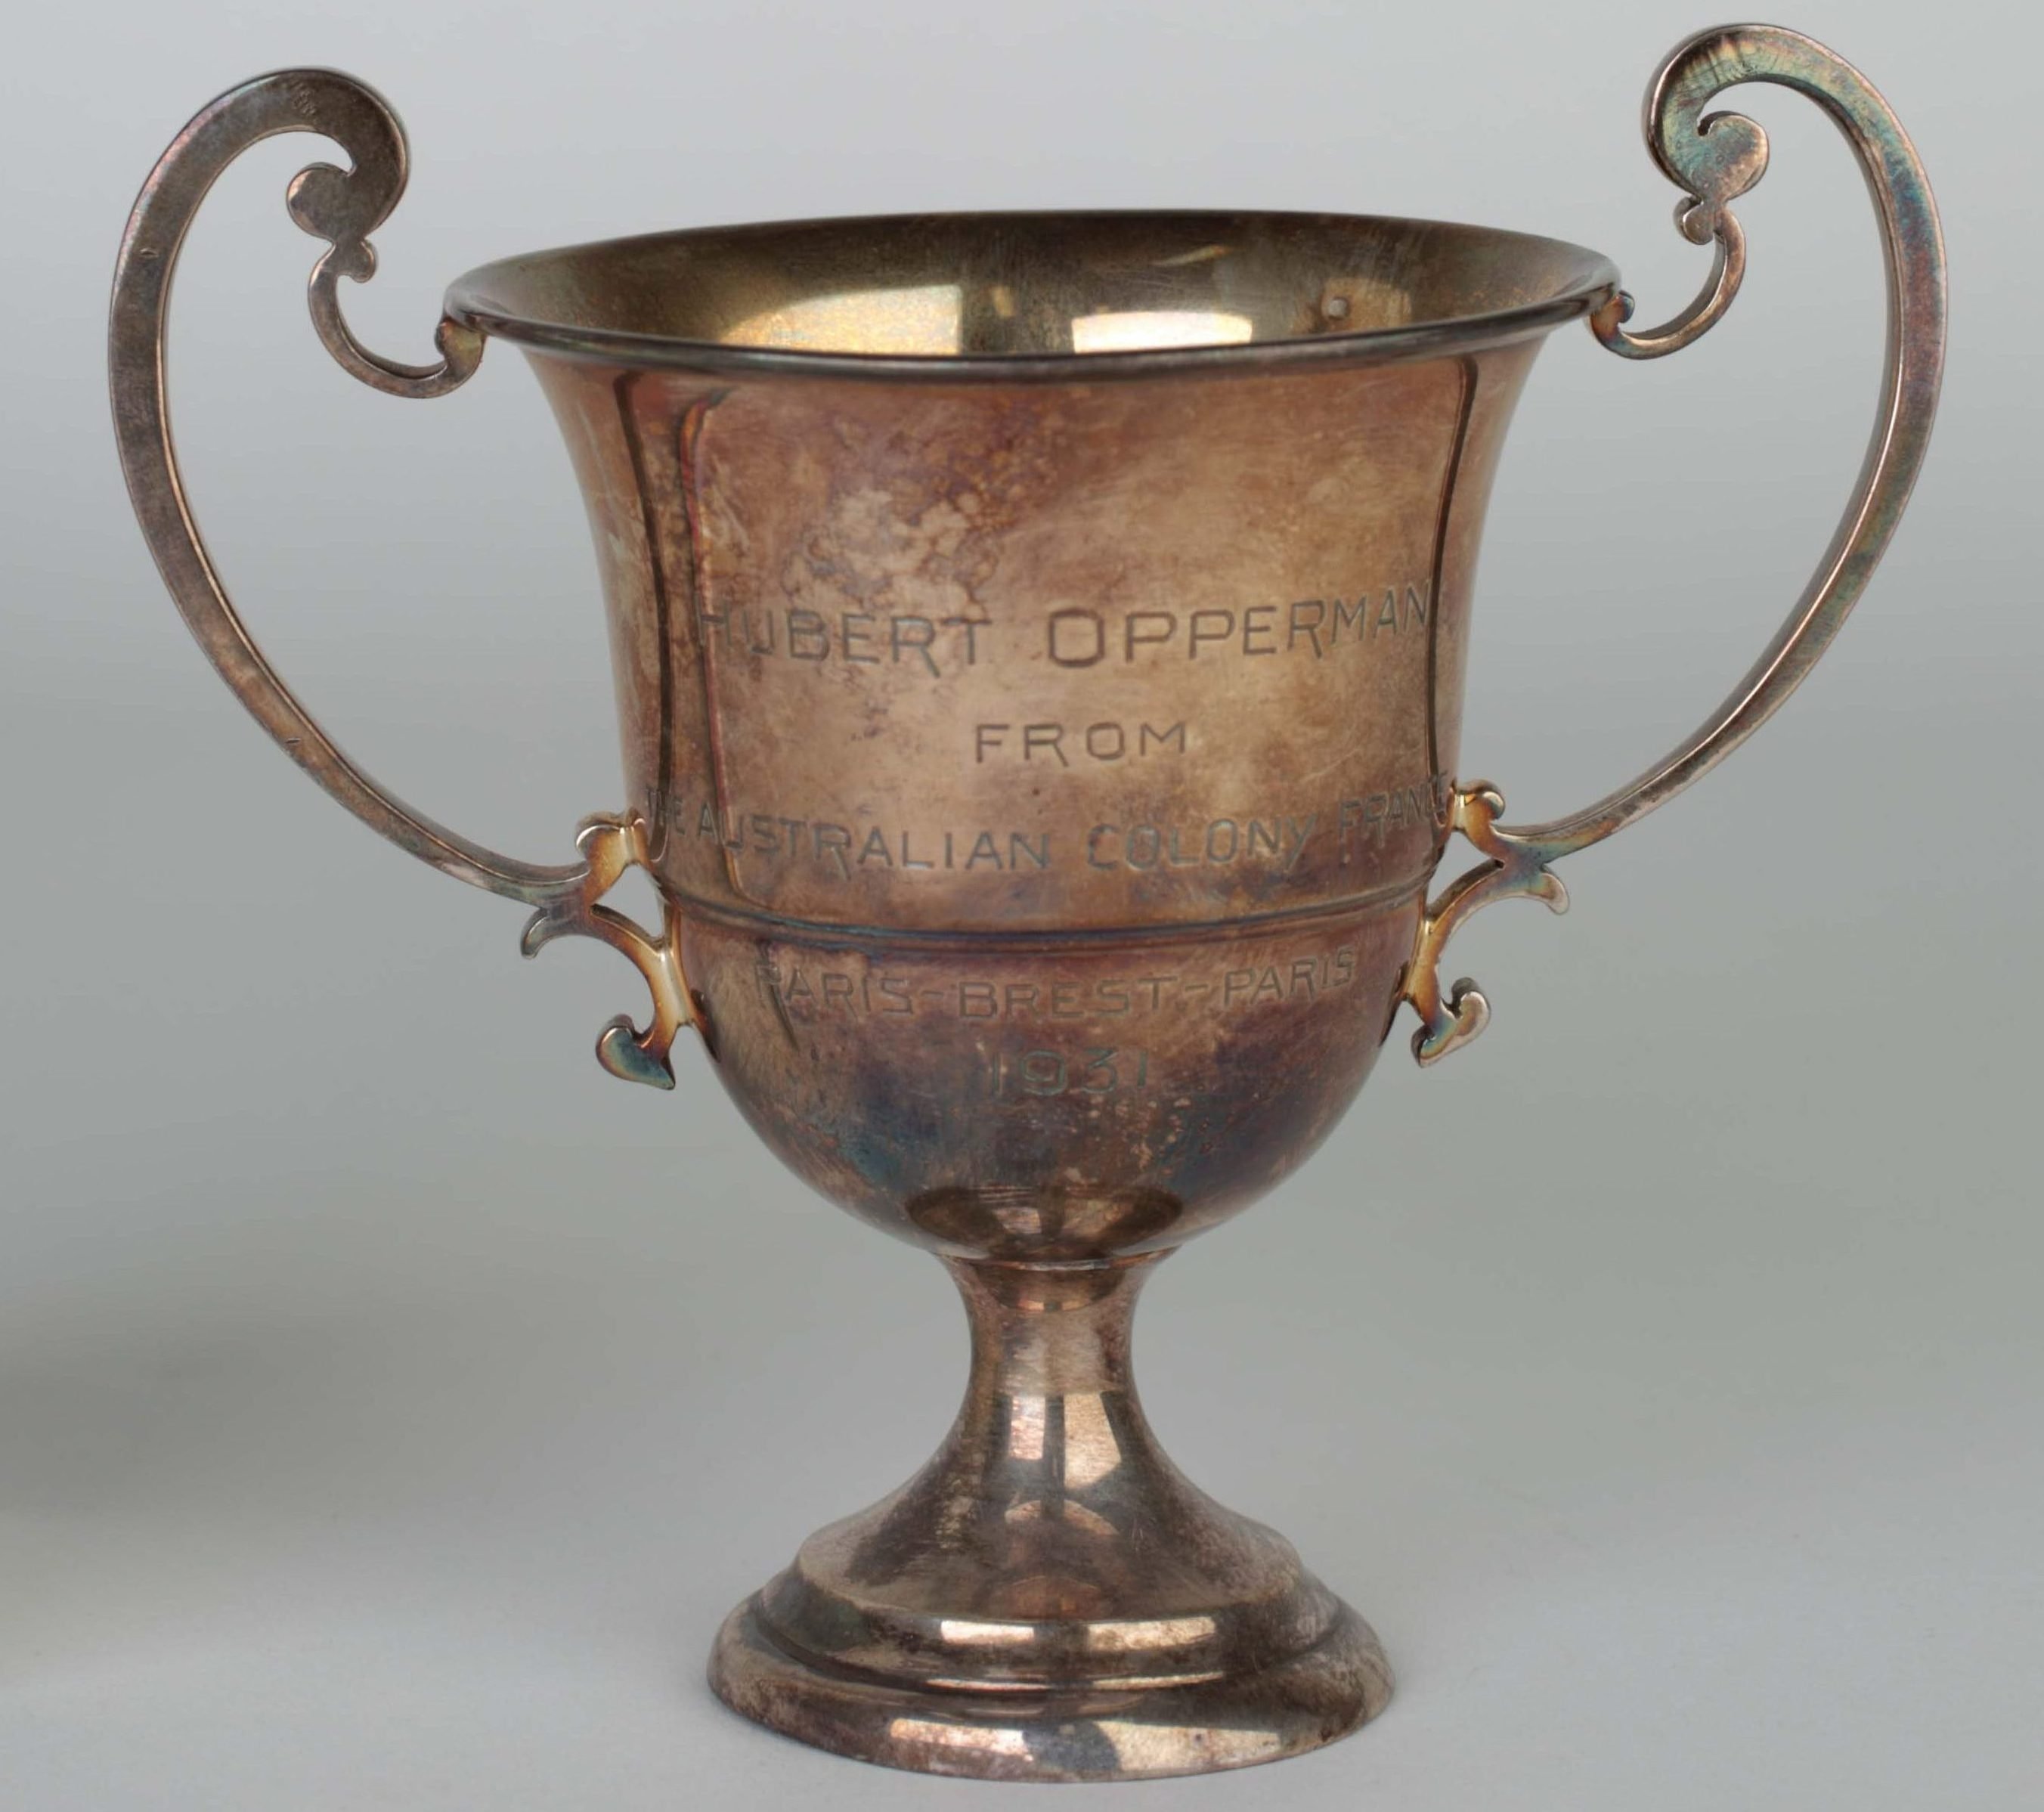 cup trophy engraved with Hubert Opperman showing tarnished surface